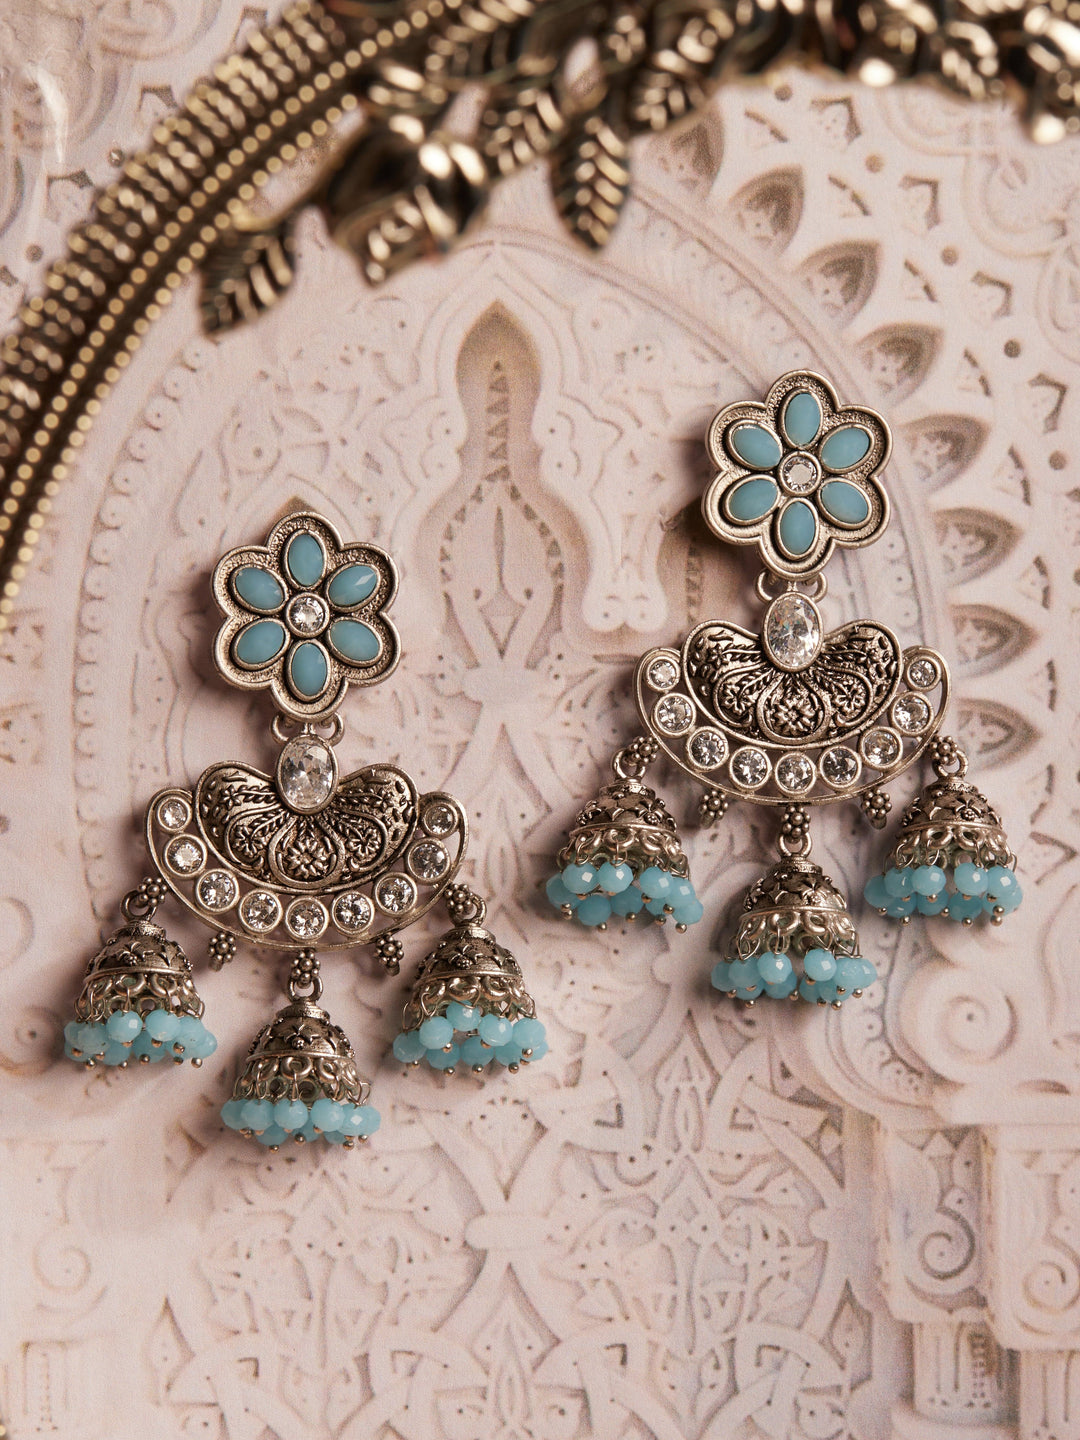 Rubans Oxidized Traditional Earrings in White and  Blue Studded Stones and Jhumka Danglers Earrings